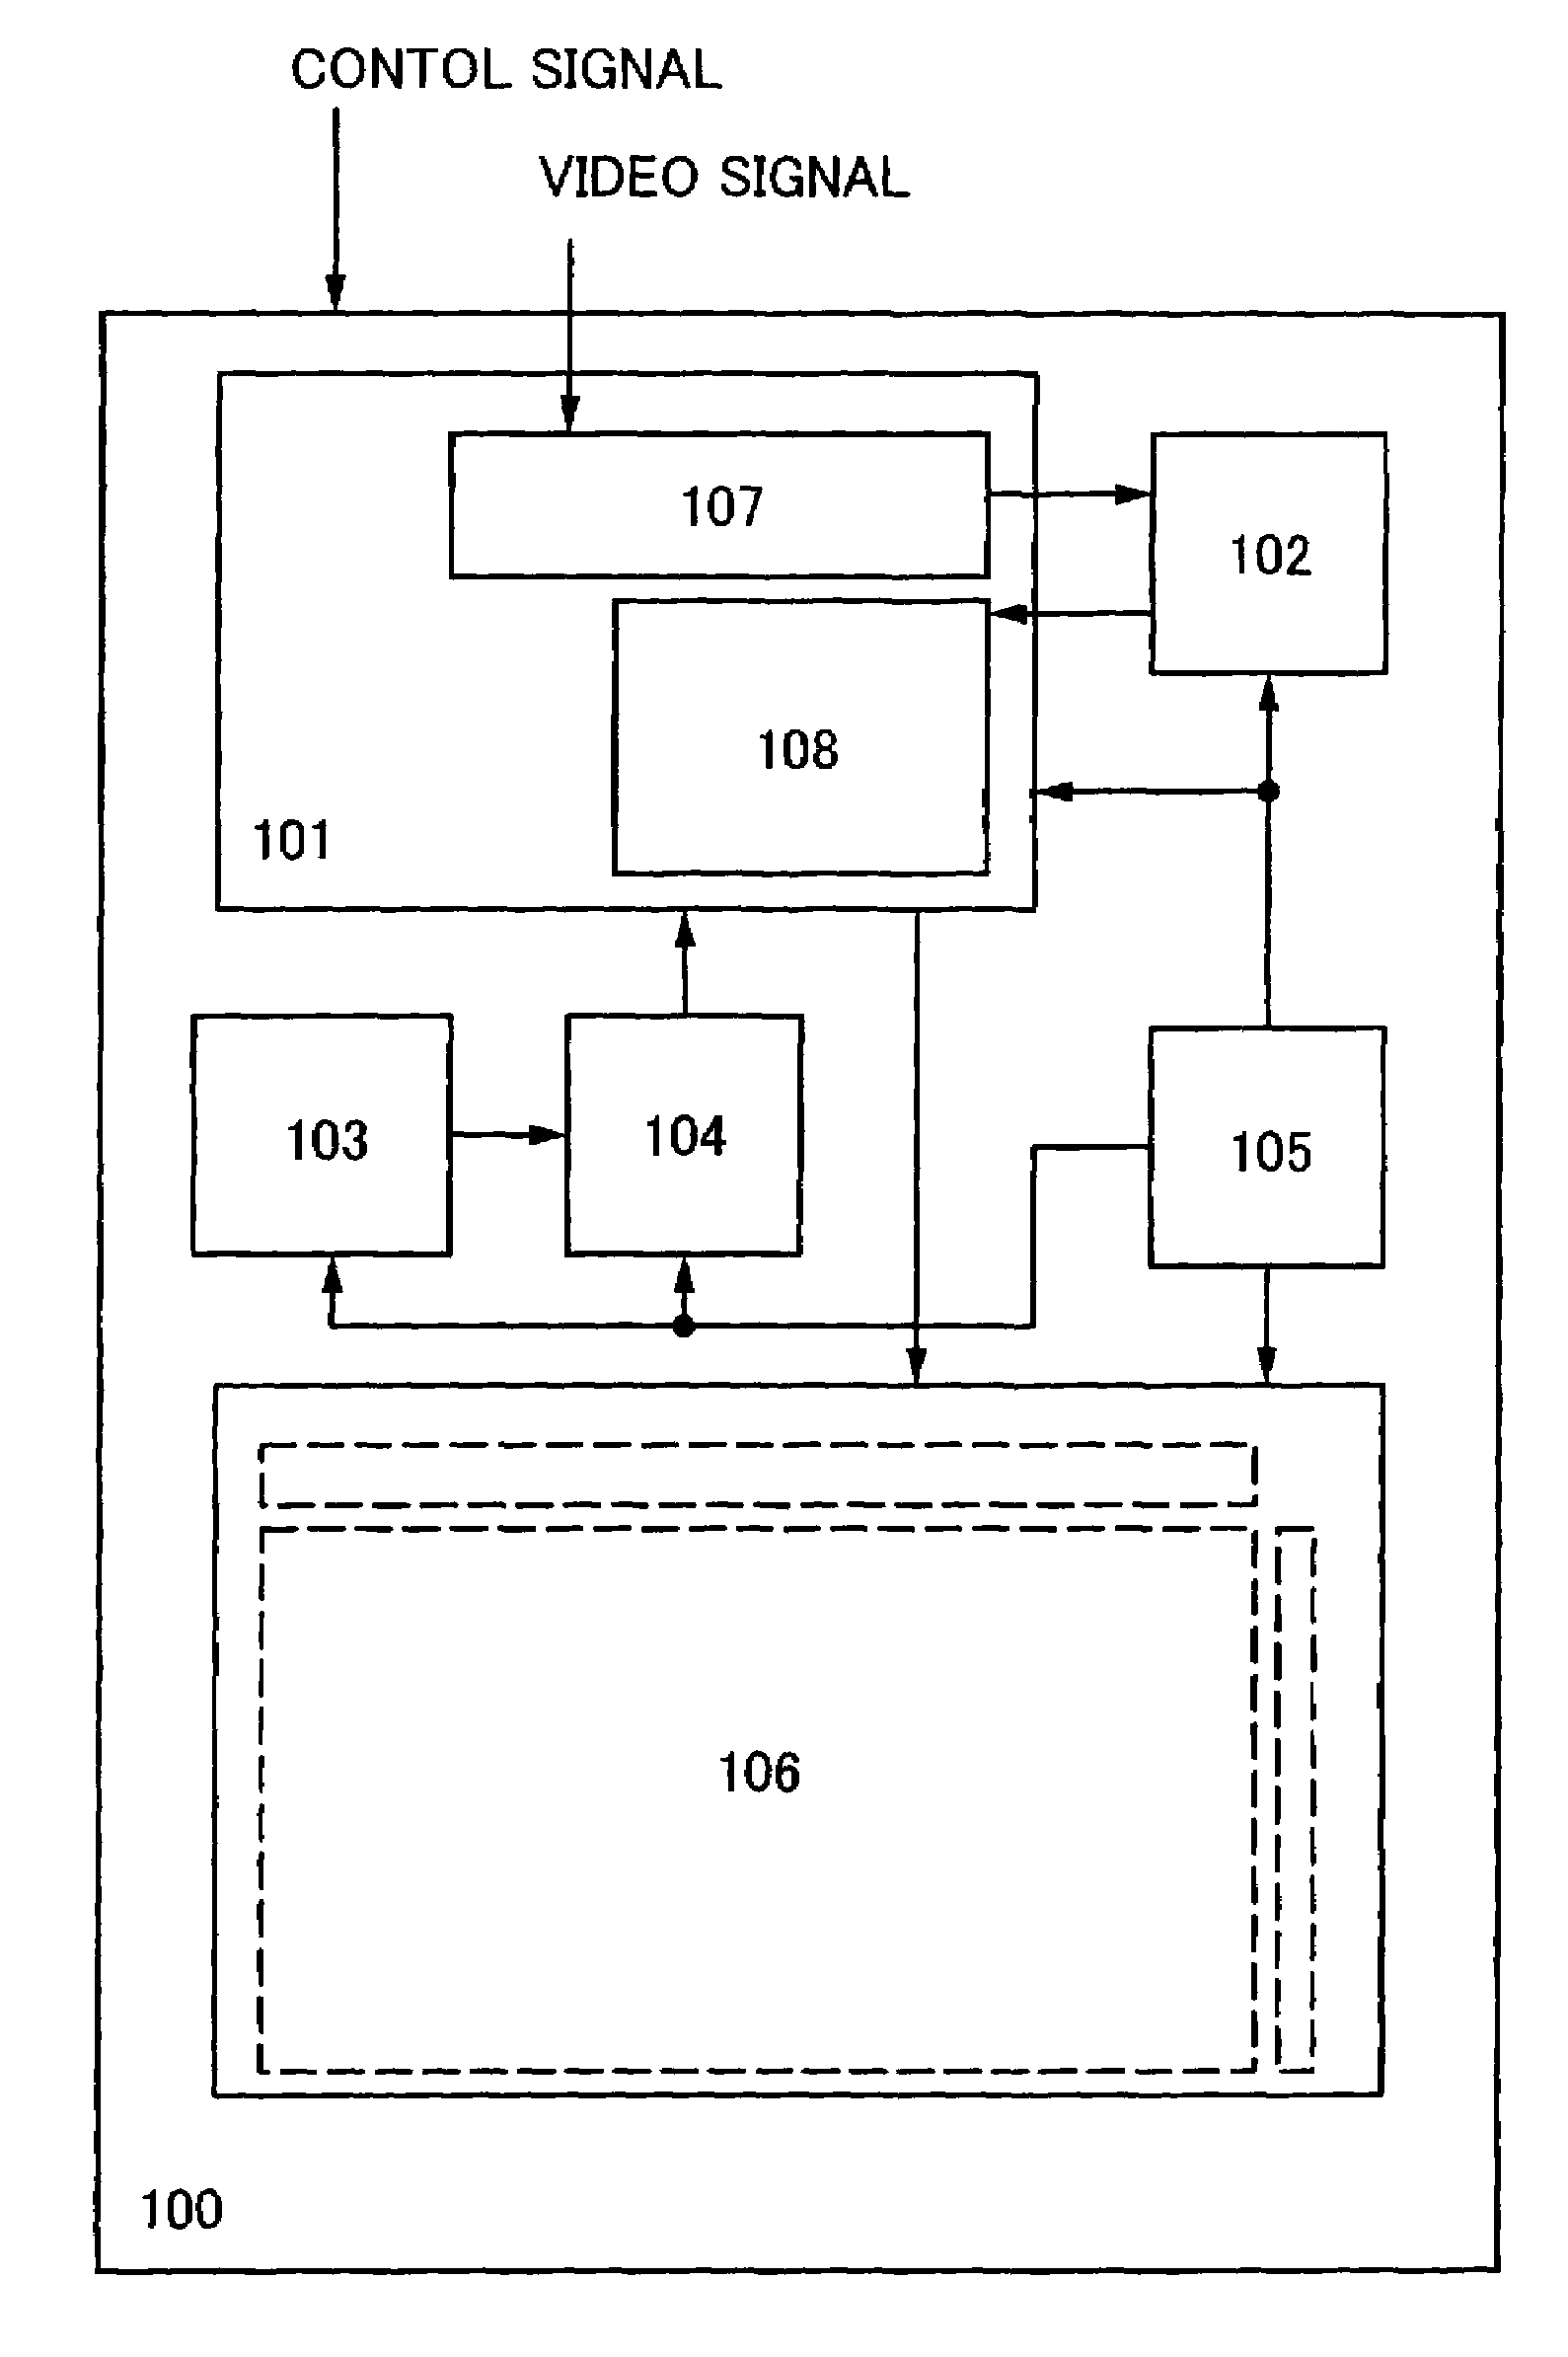 Display device with ambient light sensing